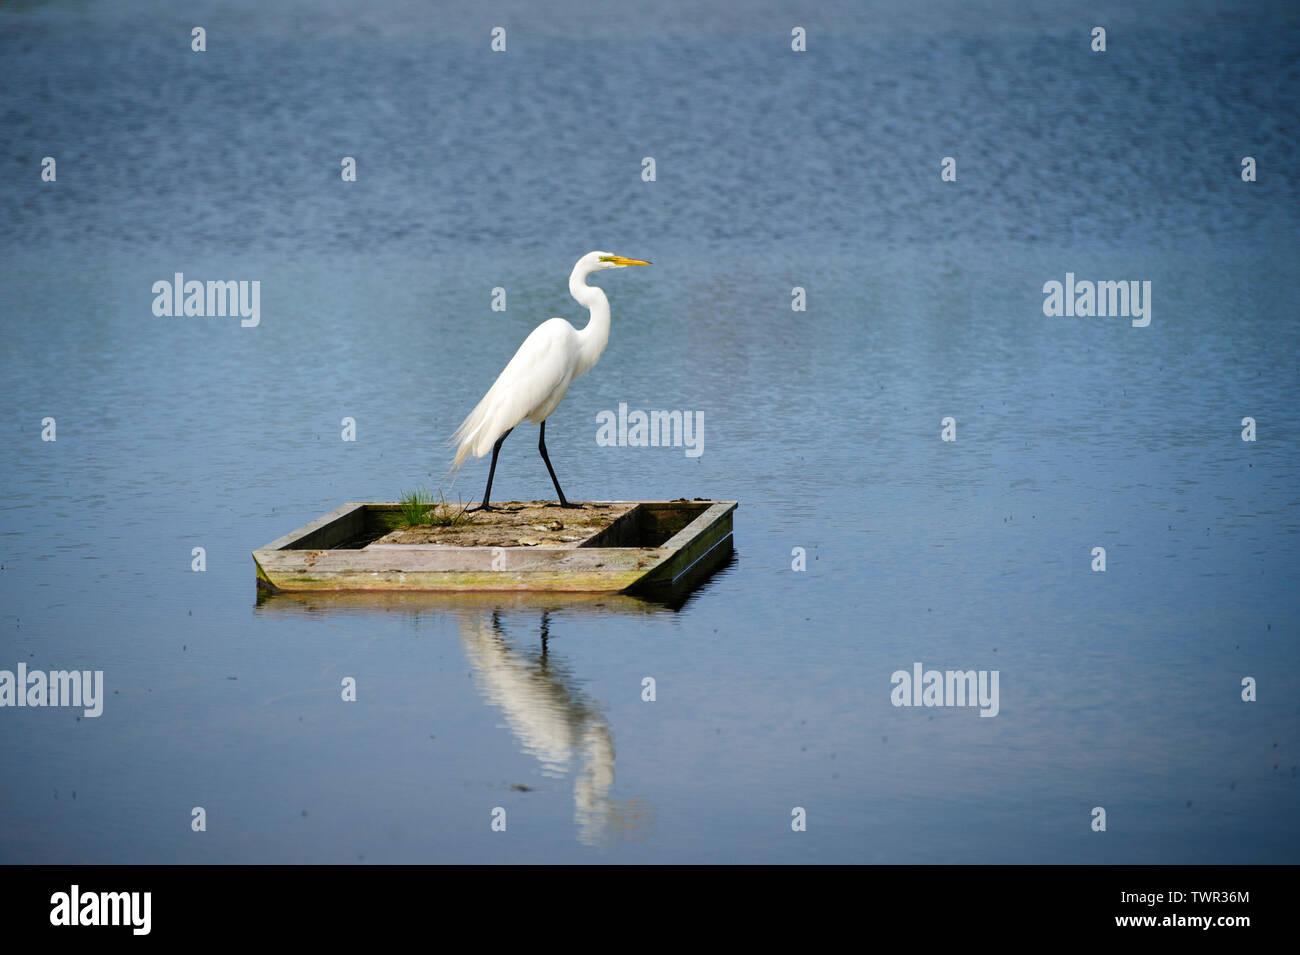 Great white egret (ardea alba) standing on a wooden islet surrounded by water. Stock Photo